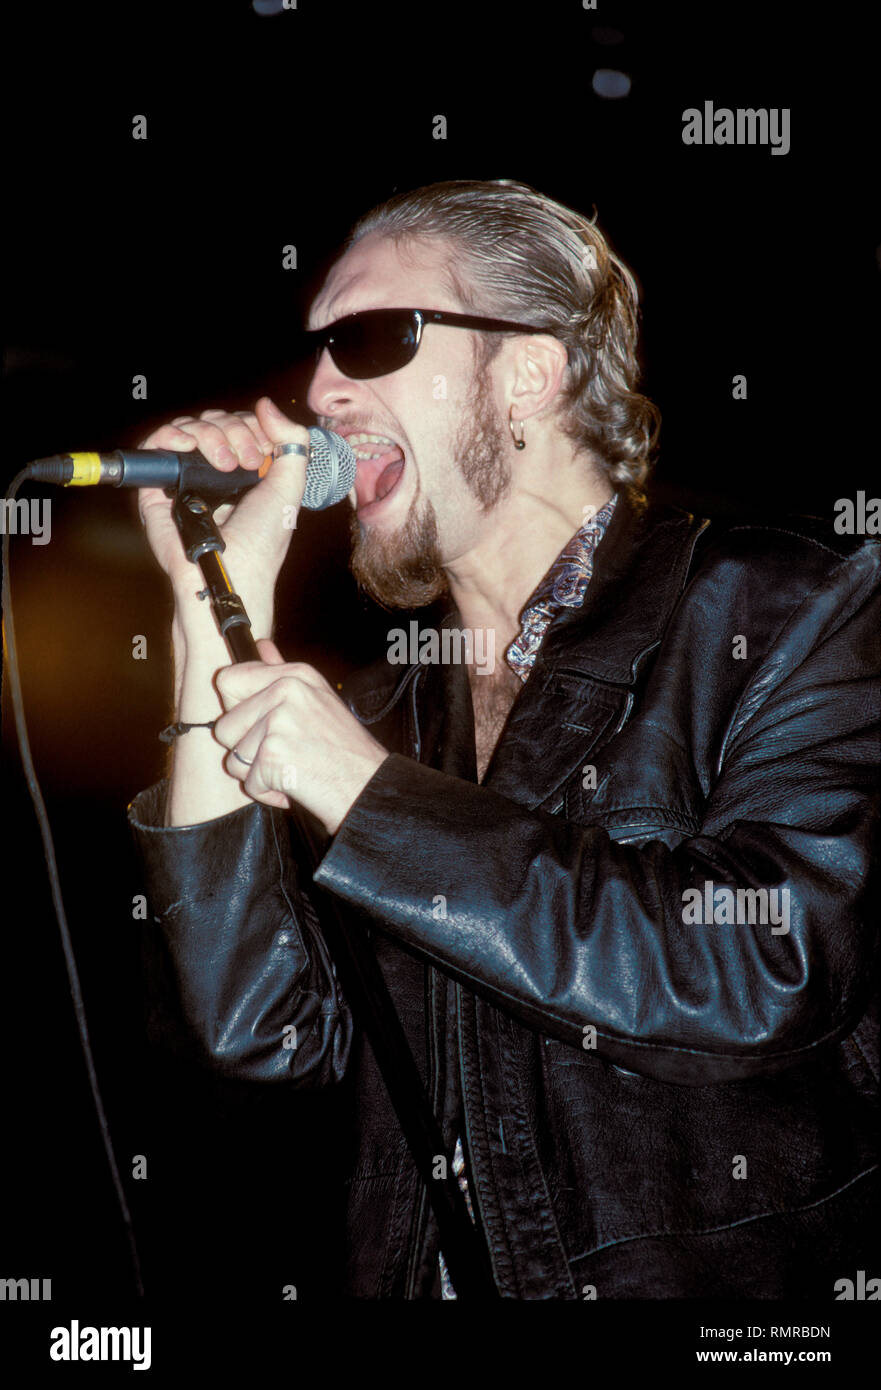 Alice In Chains vocalist Layne Staley is shown performing 'live' in concert. Stock Photo